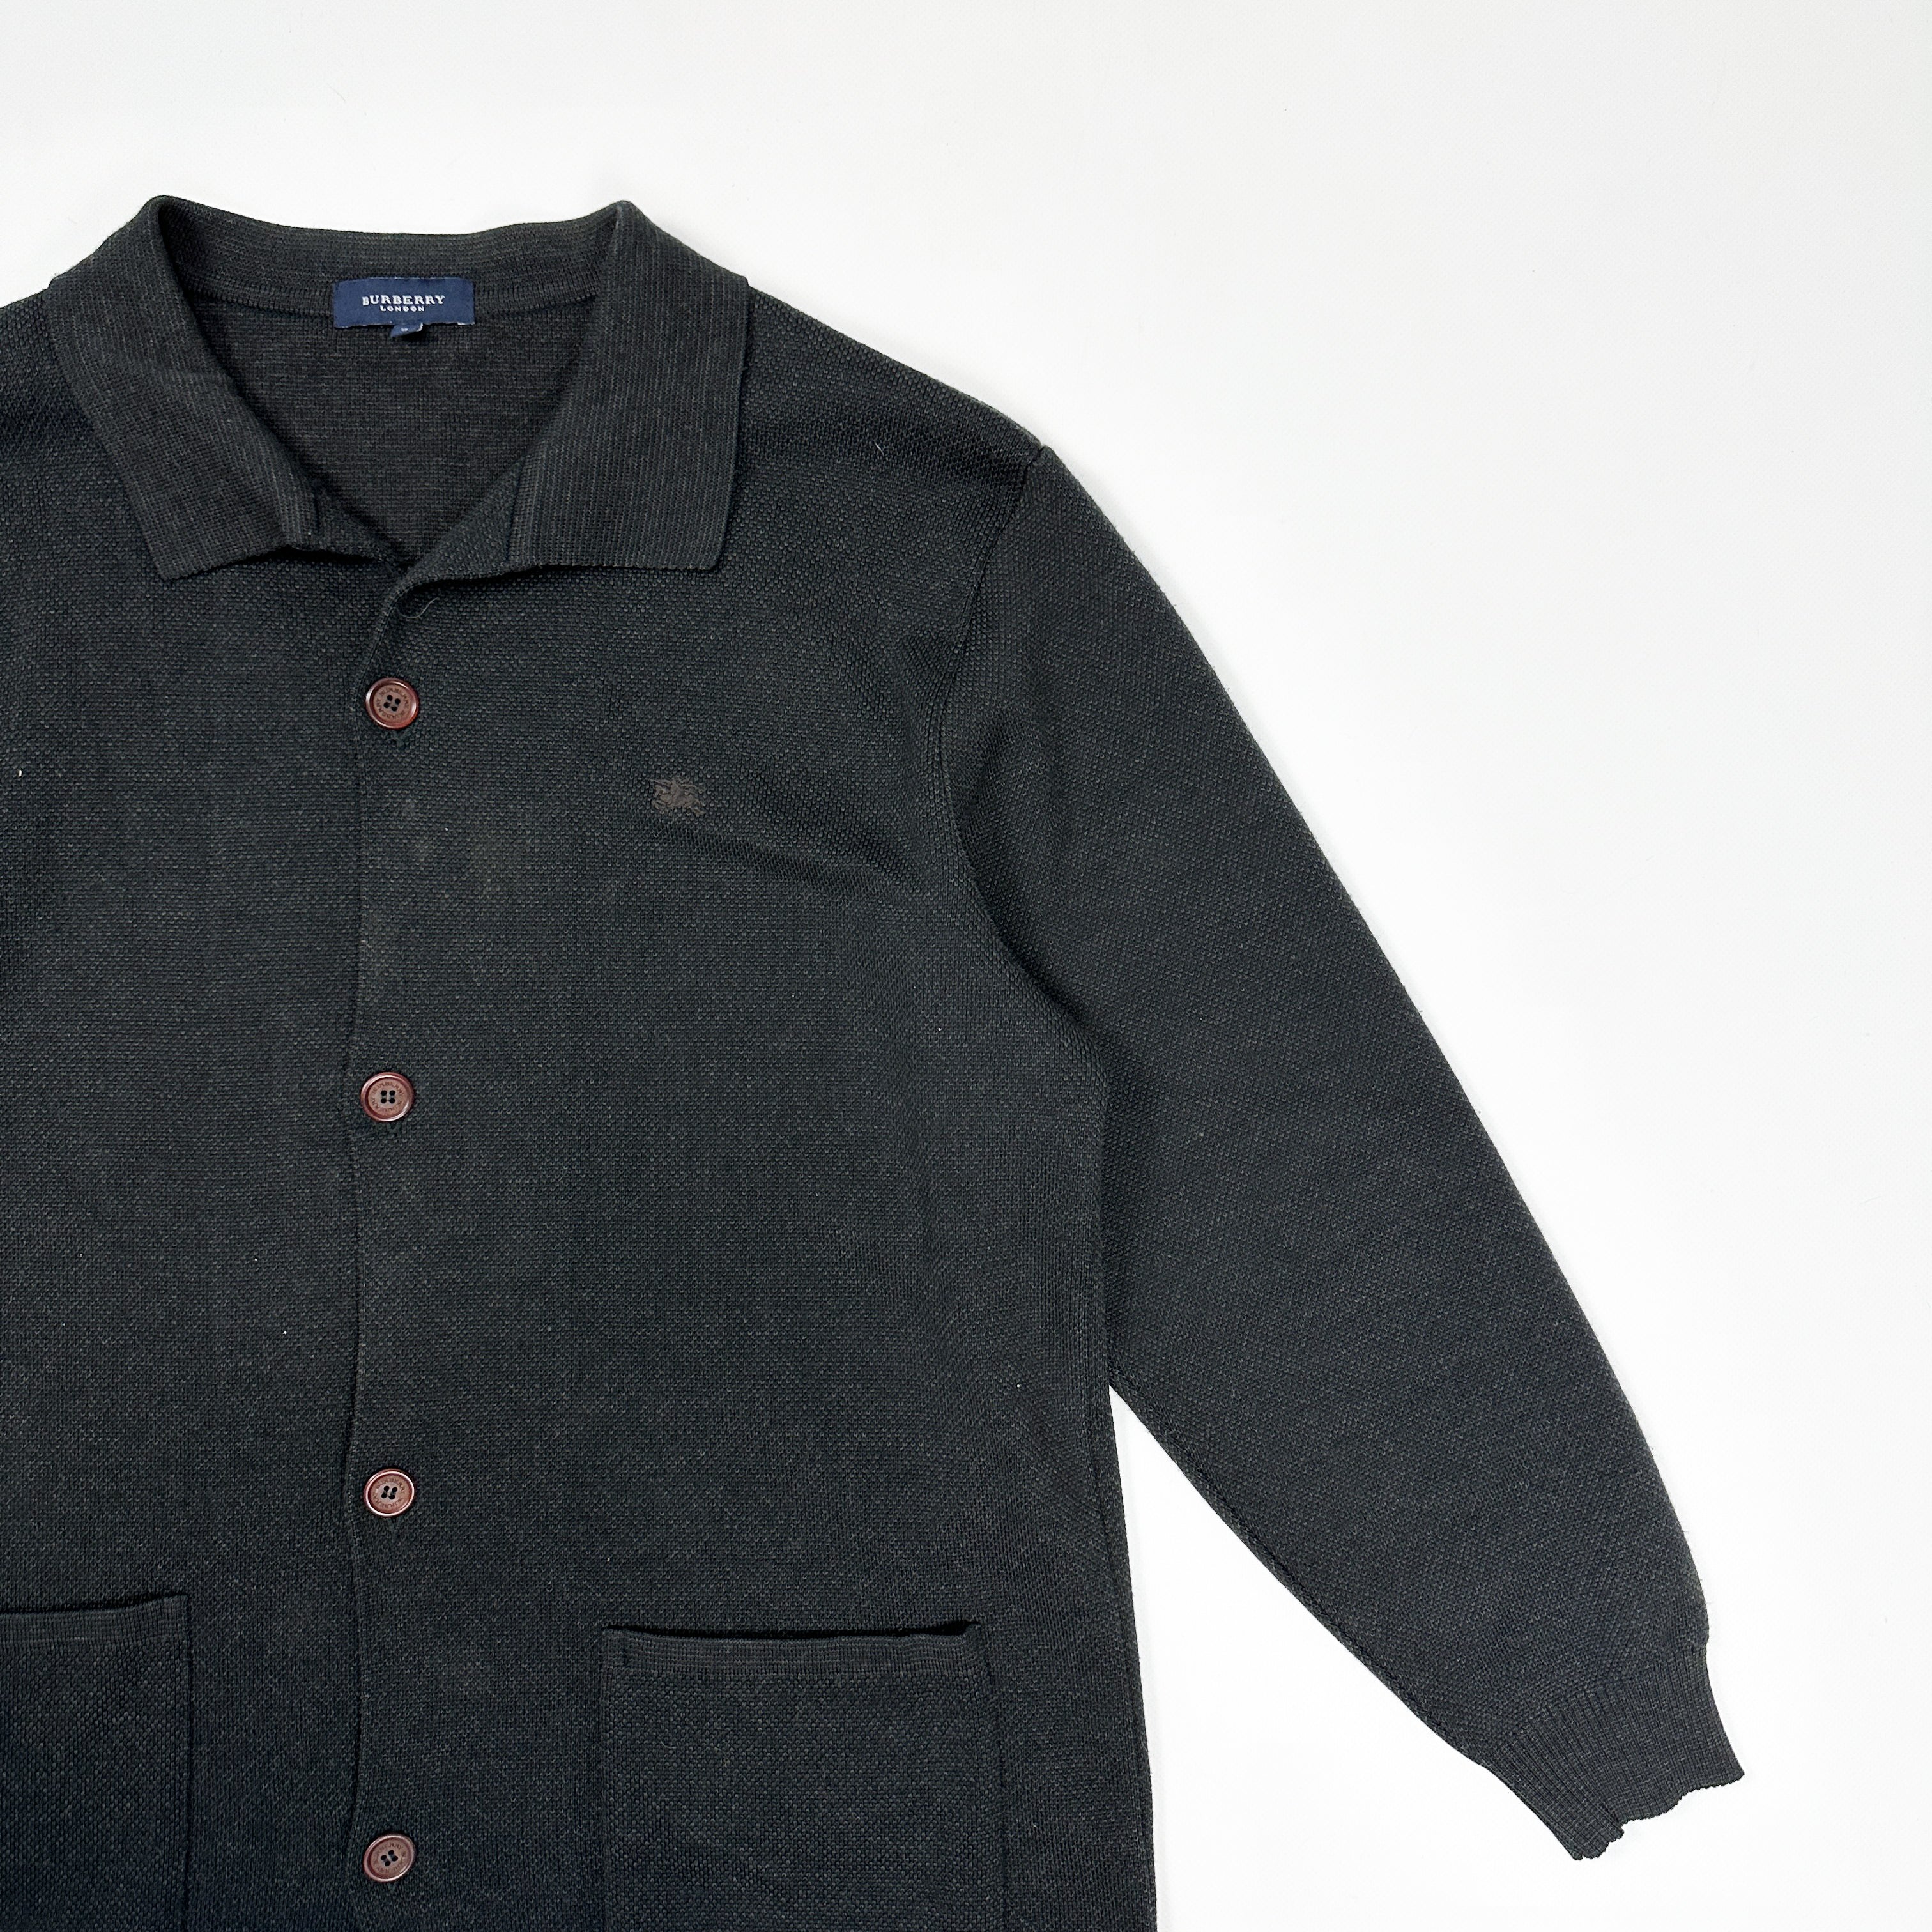 Burberry Wool Buttoned Up Cardigan 1990's – Vintage TTS